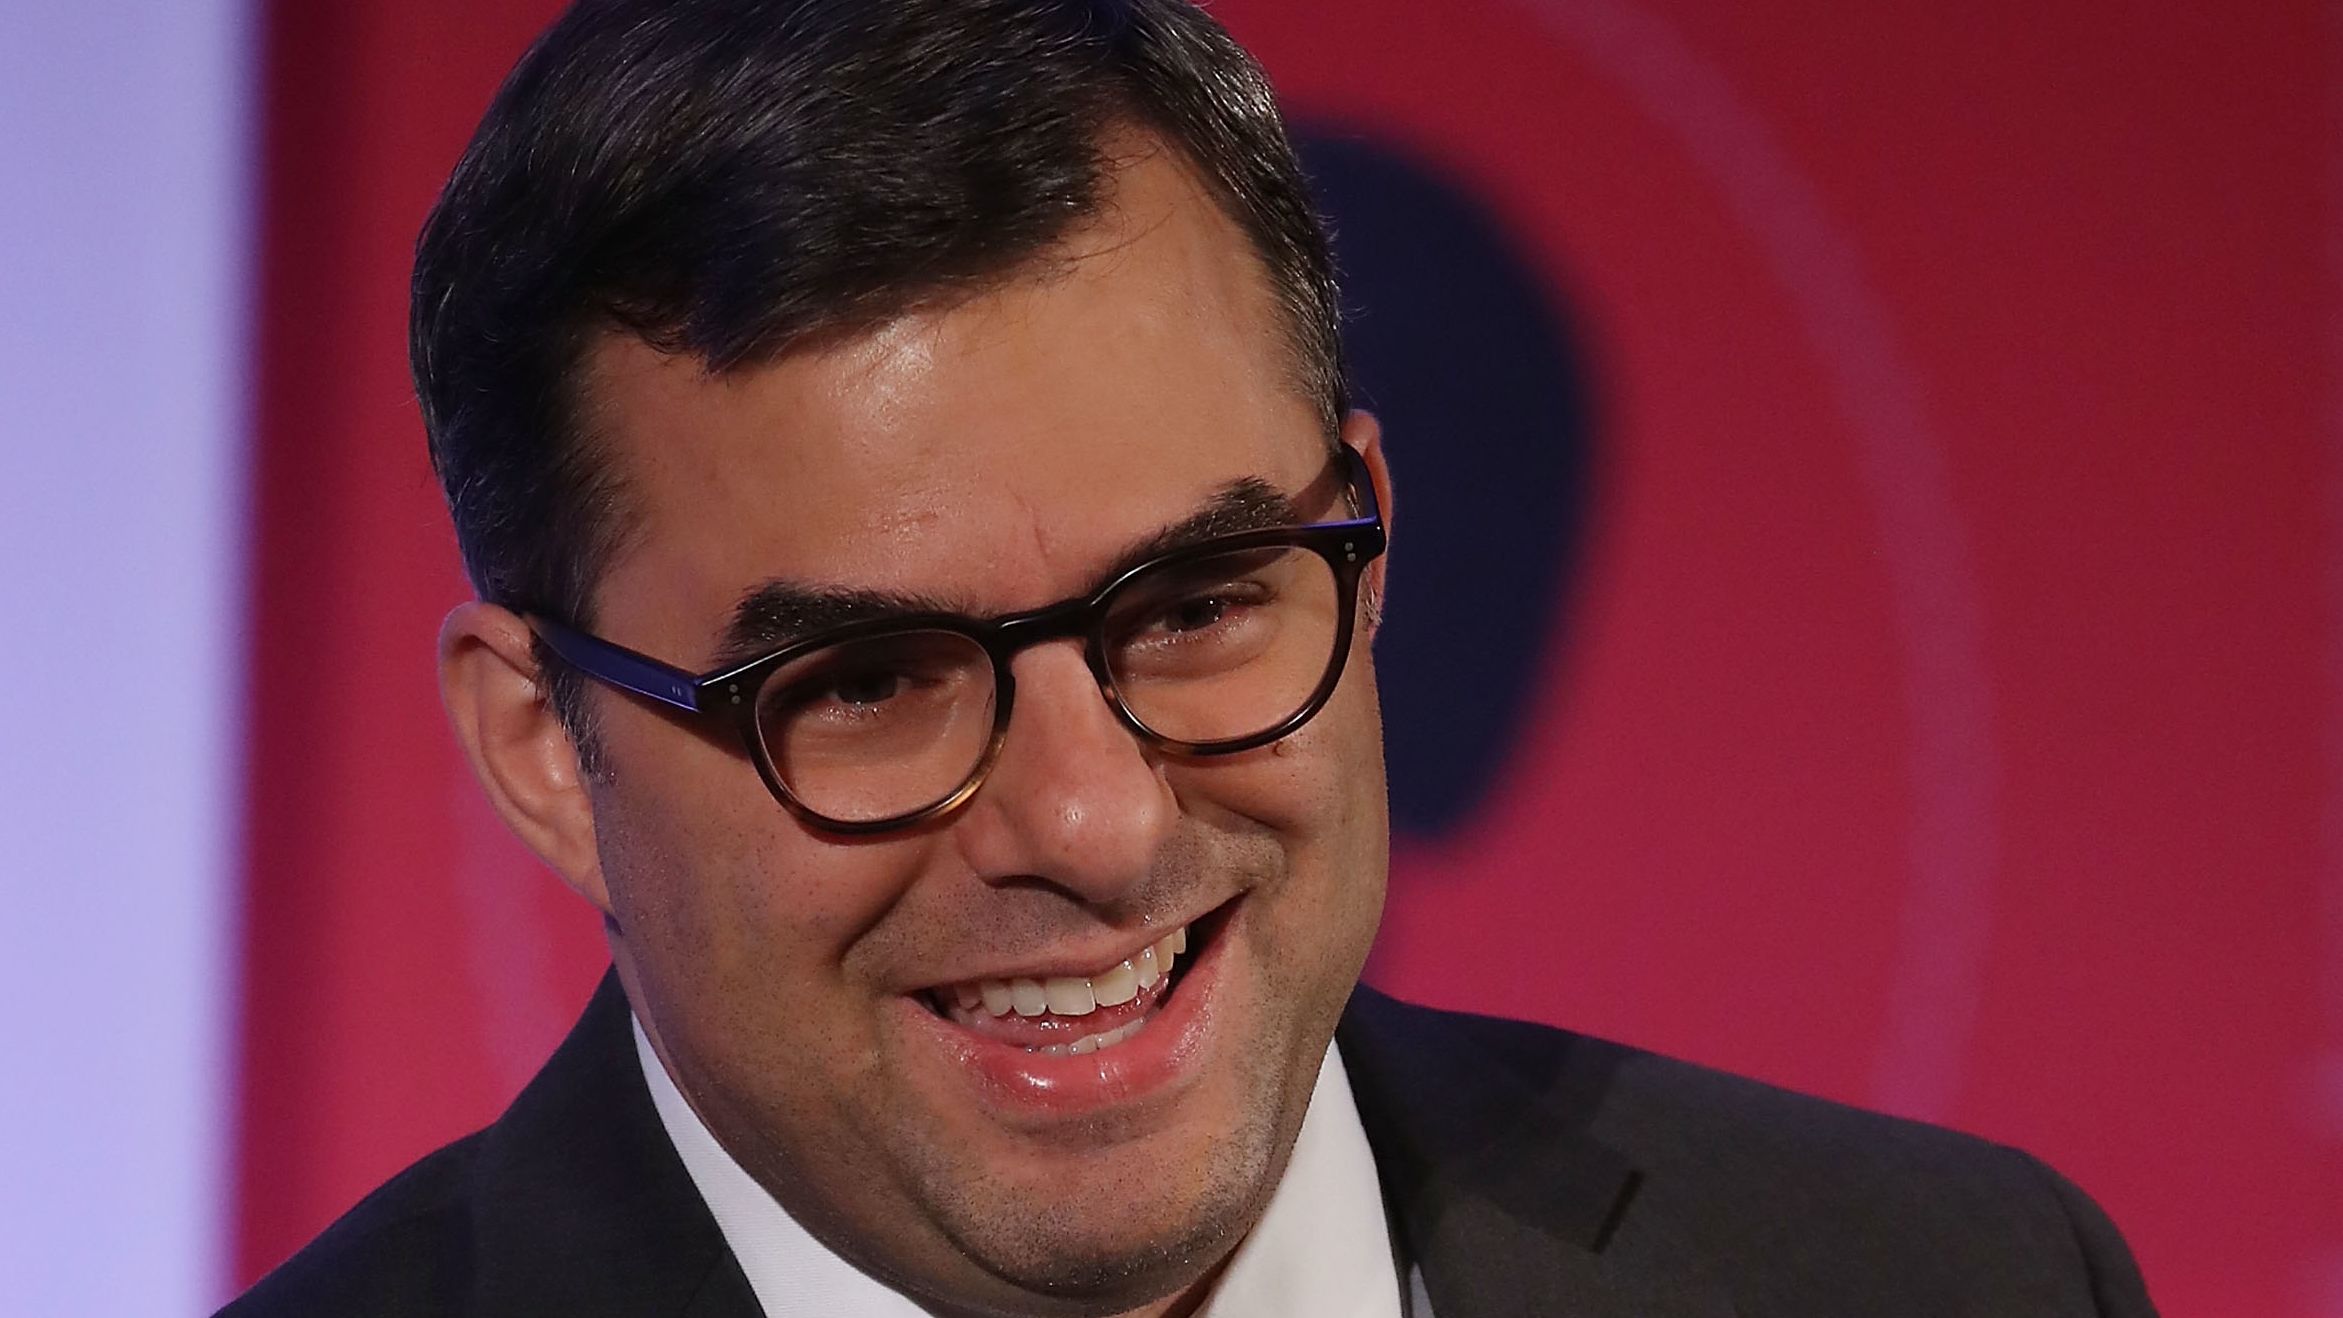 House Freedom Caucus member, Rep. Justin Amash (R-MI), speaks during a Politico Playbook Breakfast interview, at the W Hotel, on April 6, 2017 in Washington, DC. 